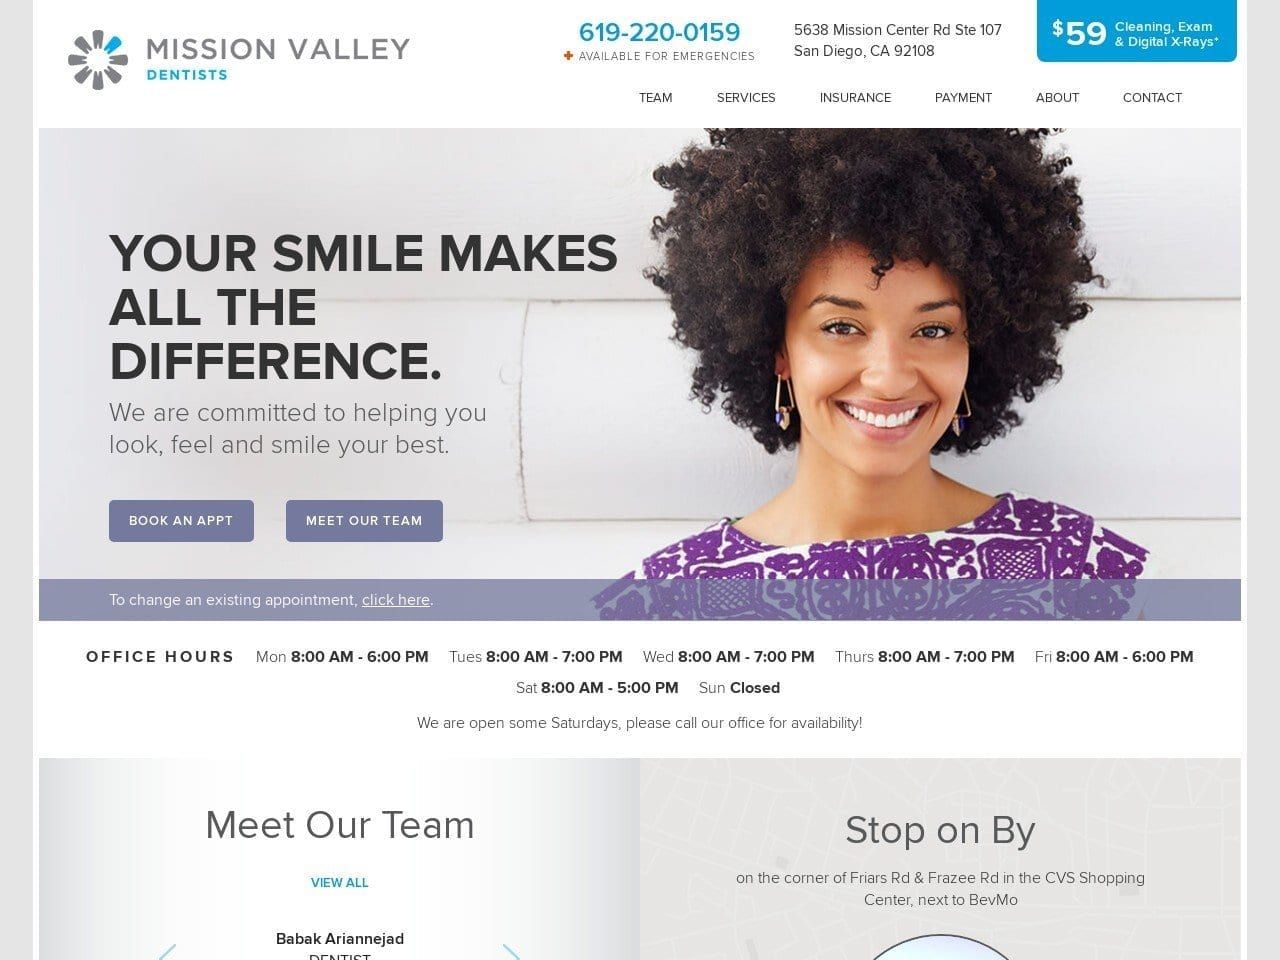 Mission Valley Dentists Website Screenshot from missionvalleydentists.com